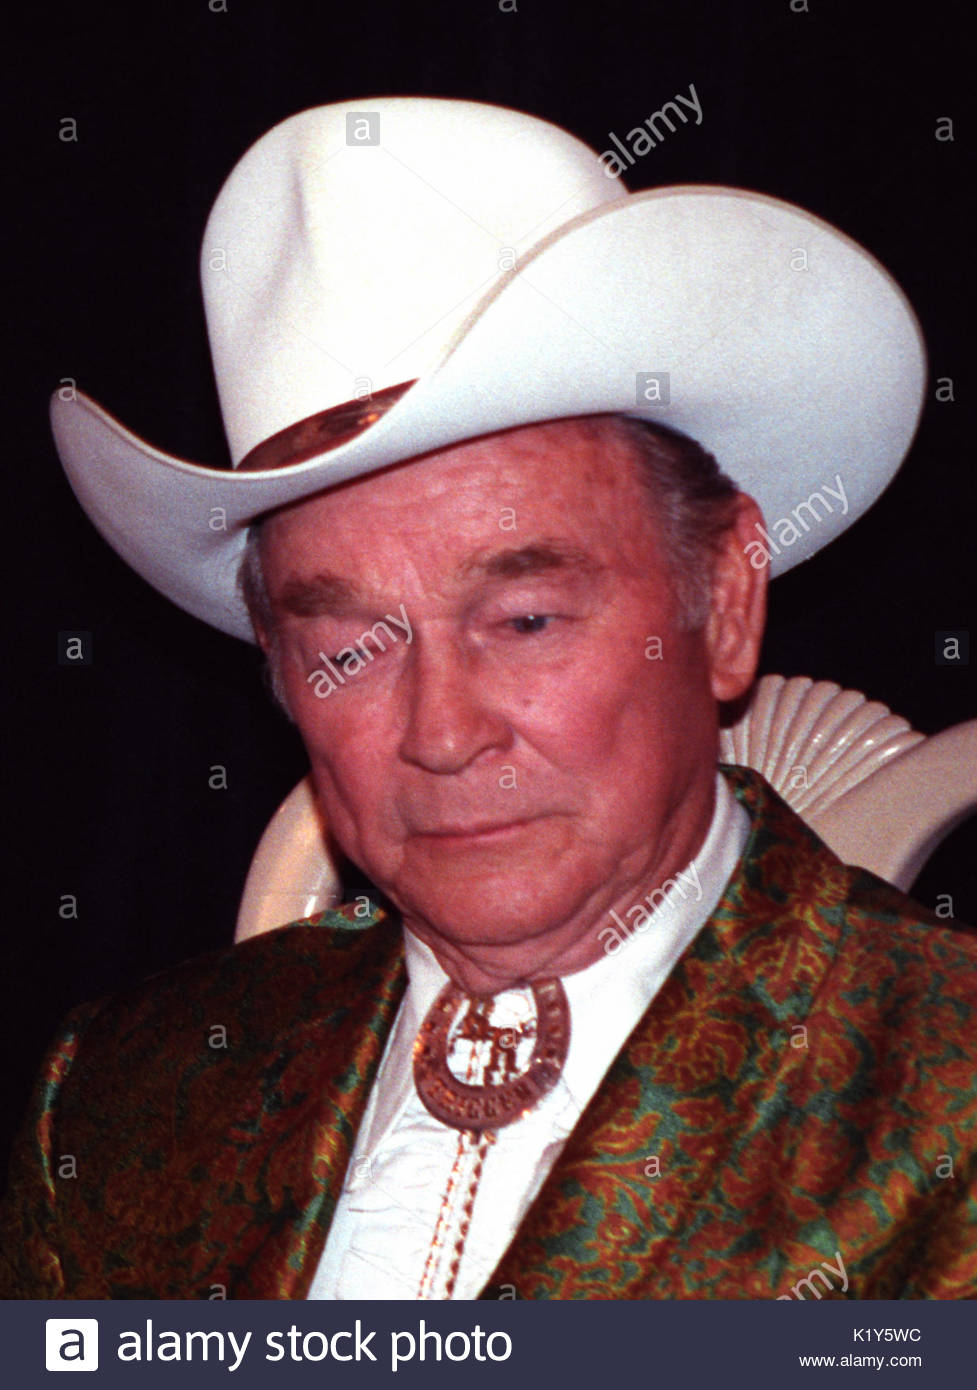 Roy Rogers Stock Photos & Roy Rogers Stock Images - Alamy